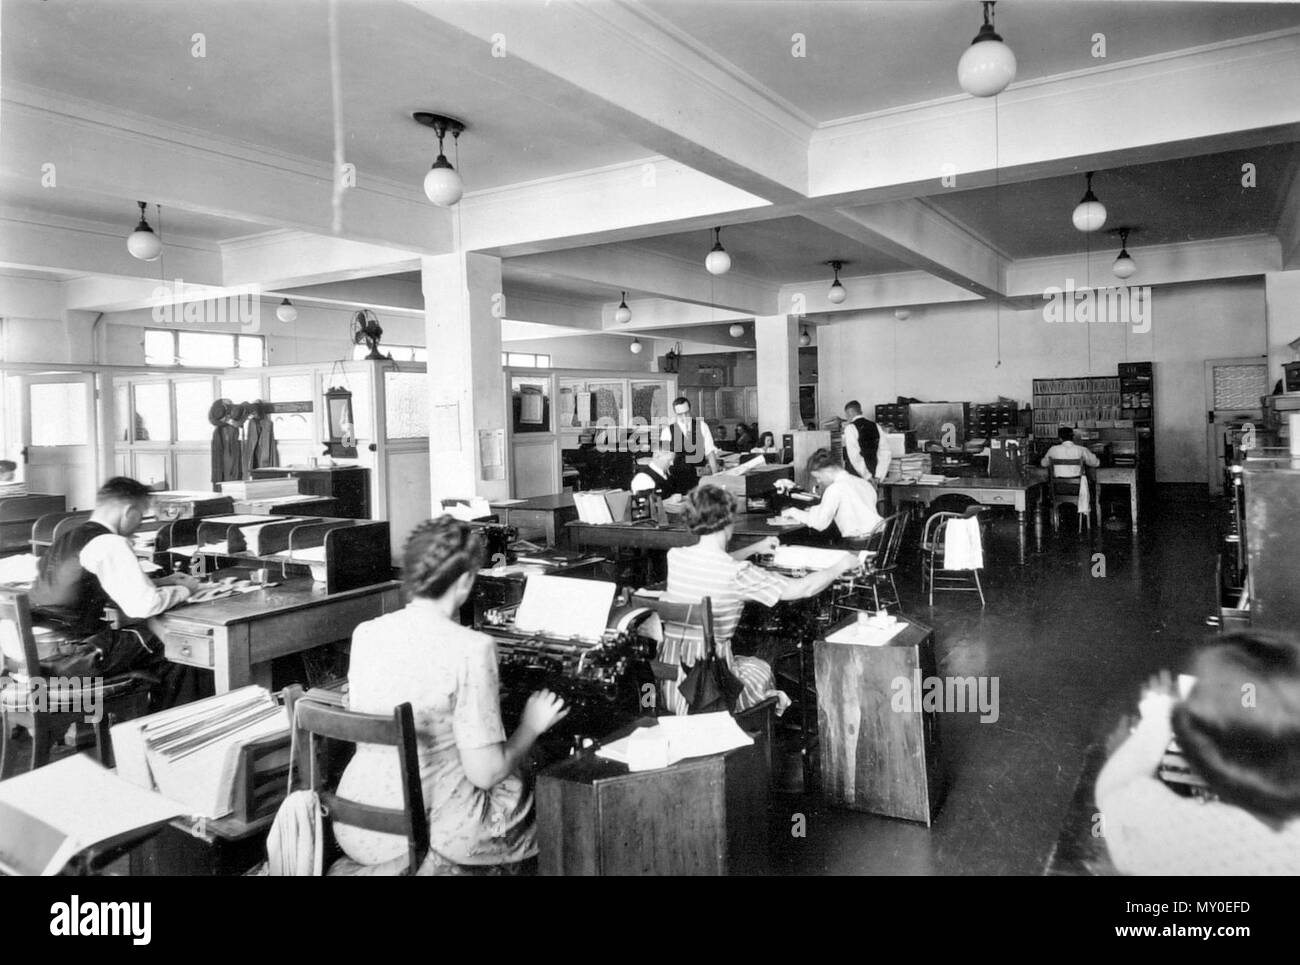 Staff members in the Public Curator's Office, Brisbane, December 1946. The Public Trustee of Queensland was established in 1915 and known as the Public Curator of Queensland until 1978. Units 1 and 2 of the Former Queensland Government Offices (Anzac Square Building) were occupied by the Public Curator in June 1933. Stock Photo